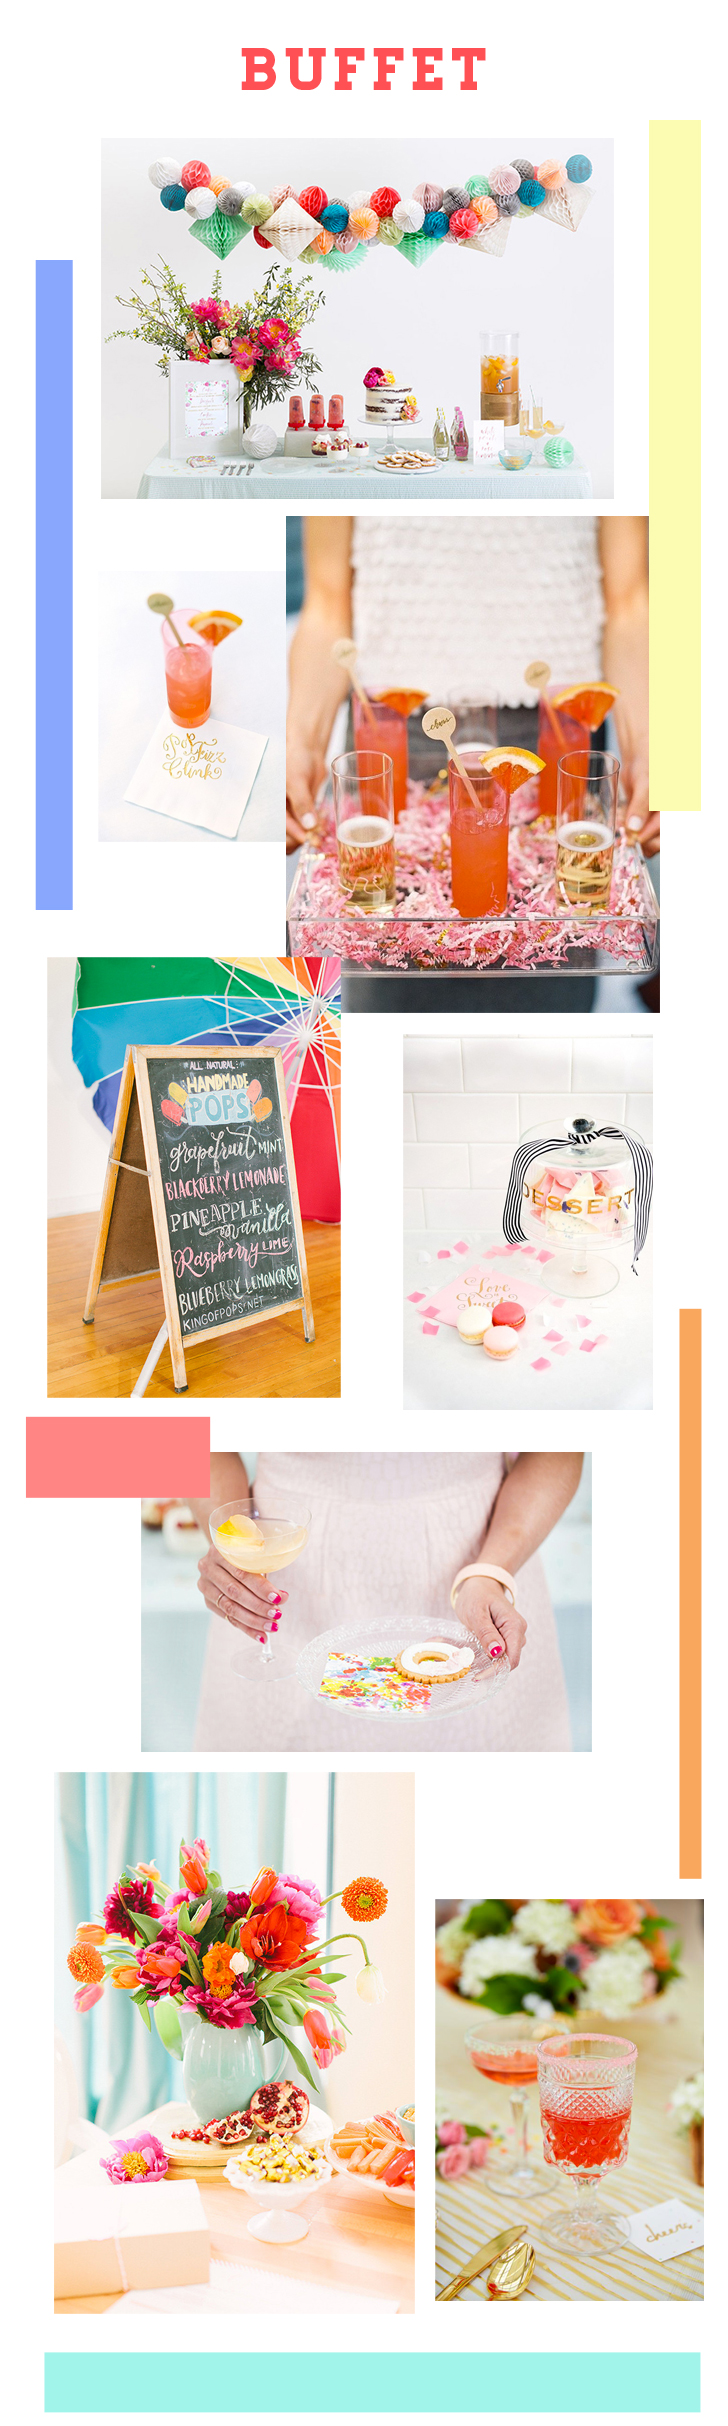 inspiration-party-coloré-buffet-mademoiselle-claudine